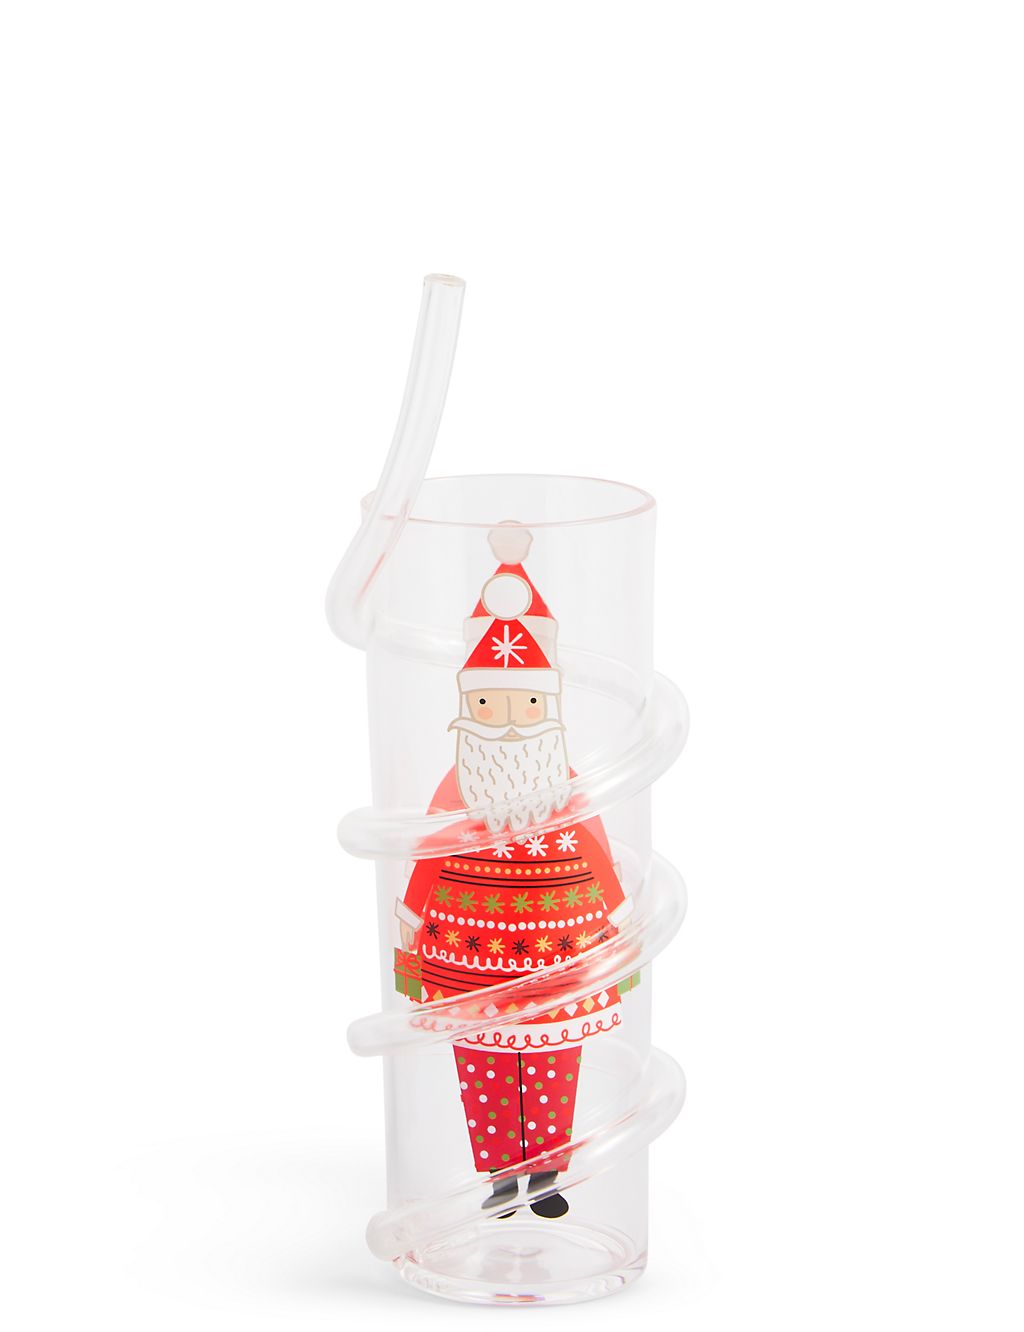 https://asset1.cxnmarksandspencer.com/is/image/mands/Christmas-Cup-with-Straw/PL_05_T34_3104S_ZZ_X_EC_0?$PDP_IMAGEGRID$&wid=1024&qlt=80